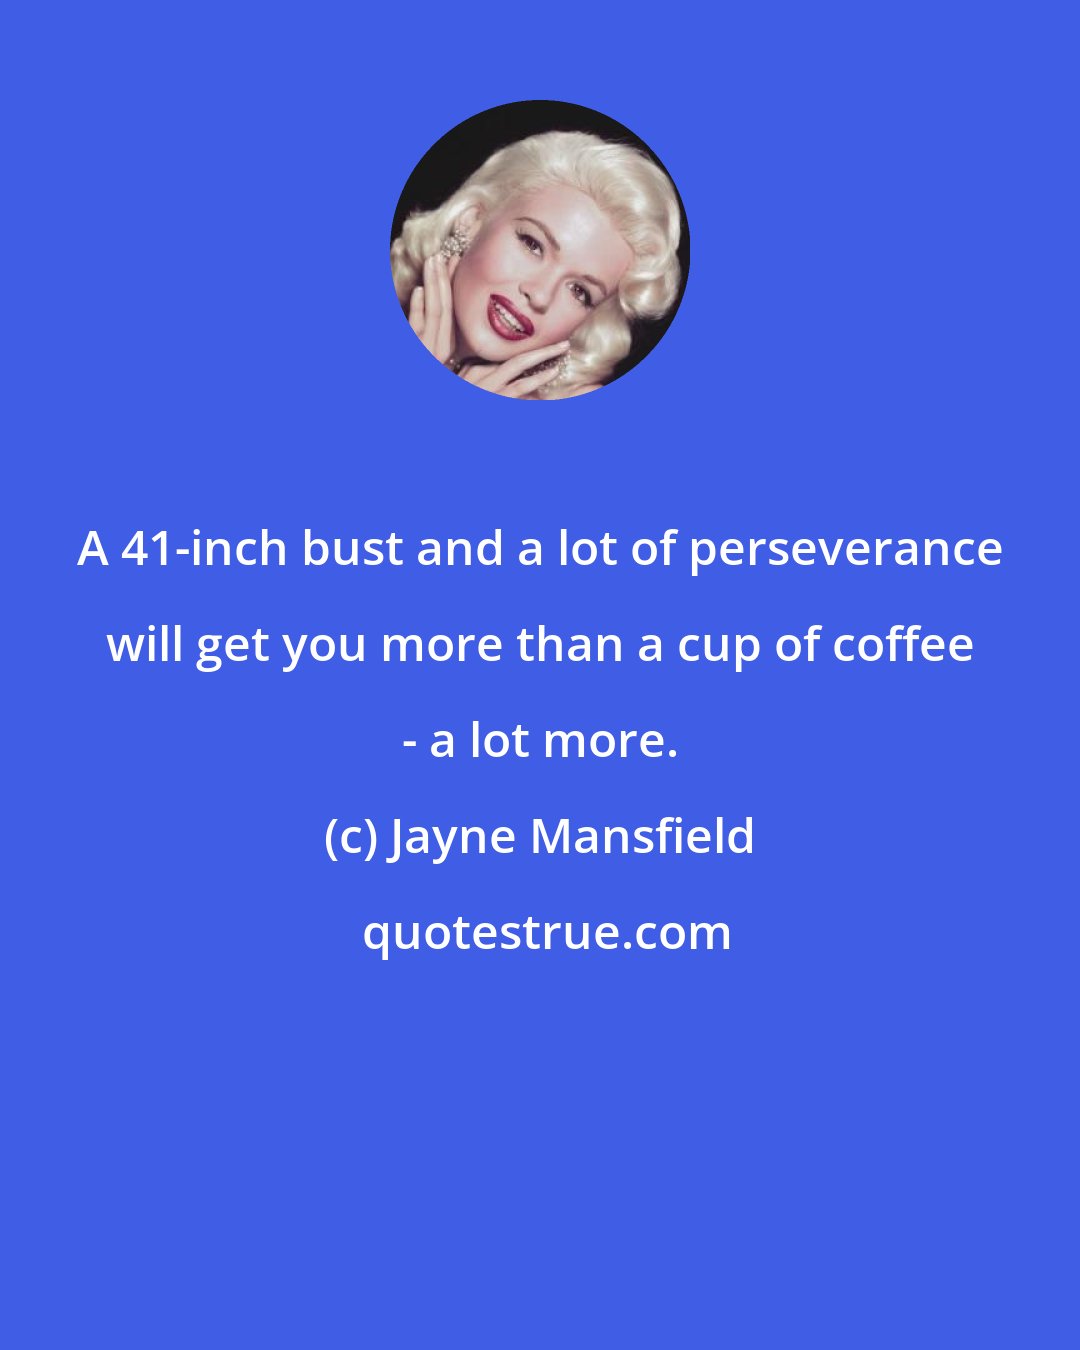 Jayne Mansfield: A 41-inch bust and a lot of perseverance will get you more than a cup of coffee - a lot more.